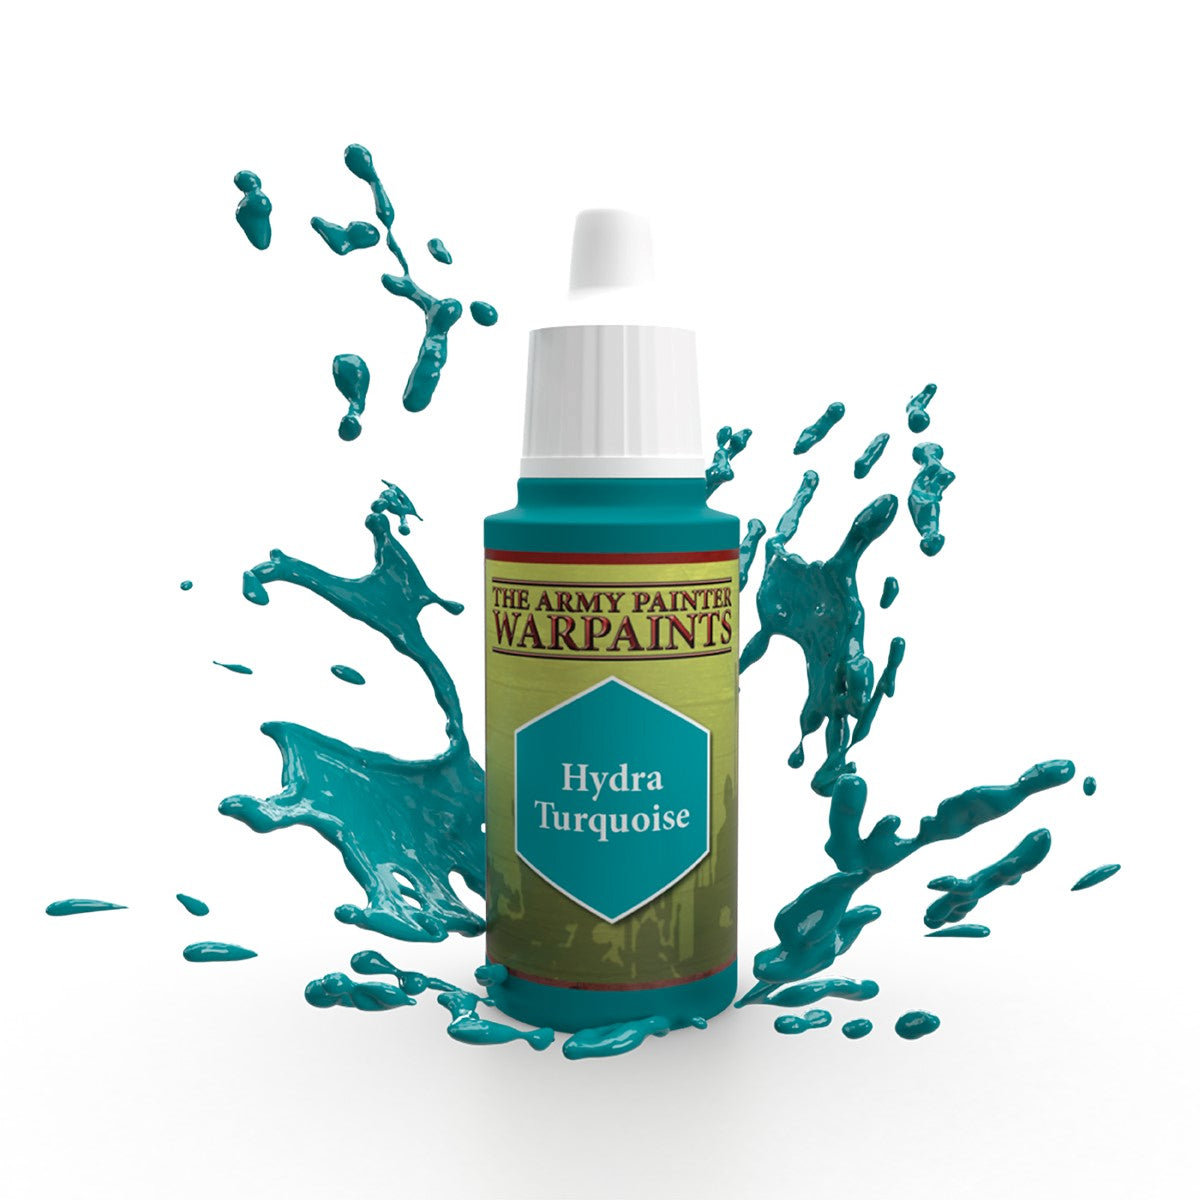 Army Painter Warpaints - Hydra Turquoise Acrylic Paint 18ml